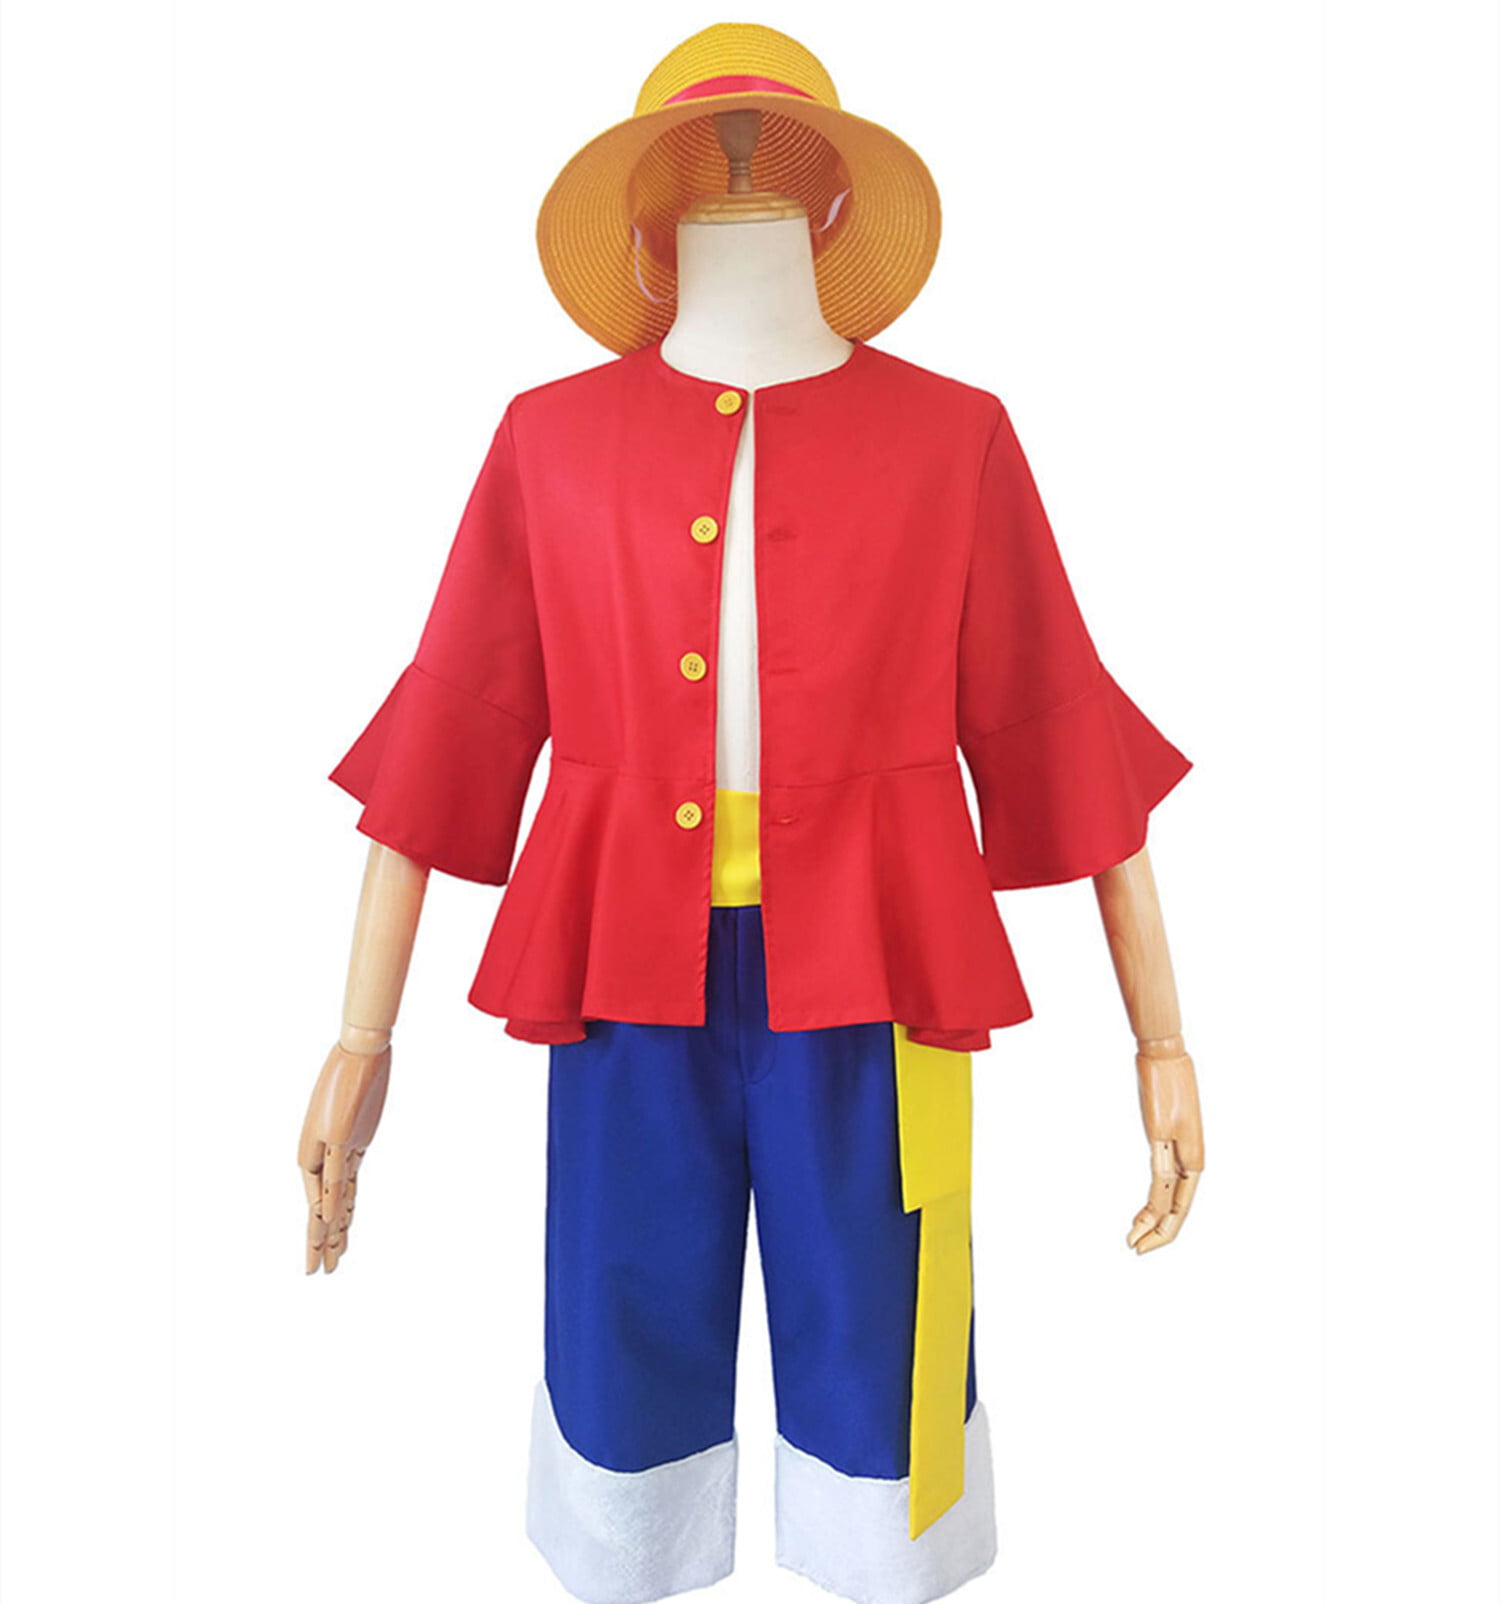 One Piece Monkey D Luffy Captain Cosplay Anime Costume Uniform Cloak Suit  With Straw Hat  Fruugo NO